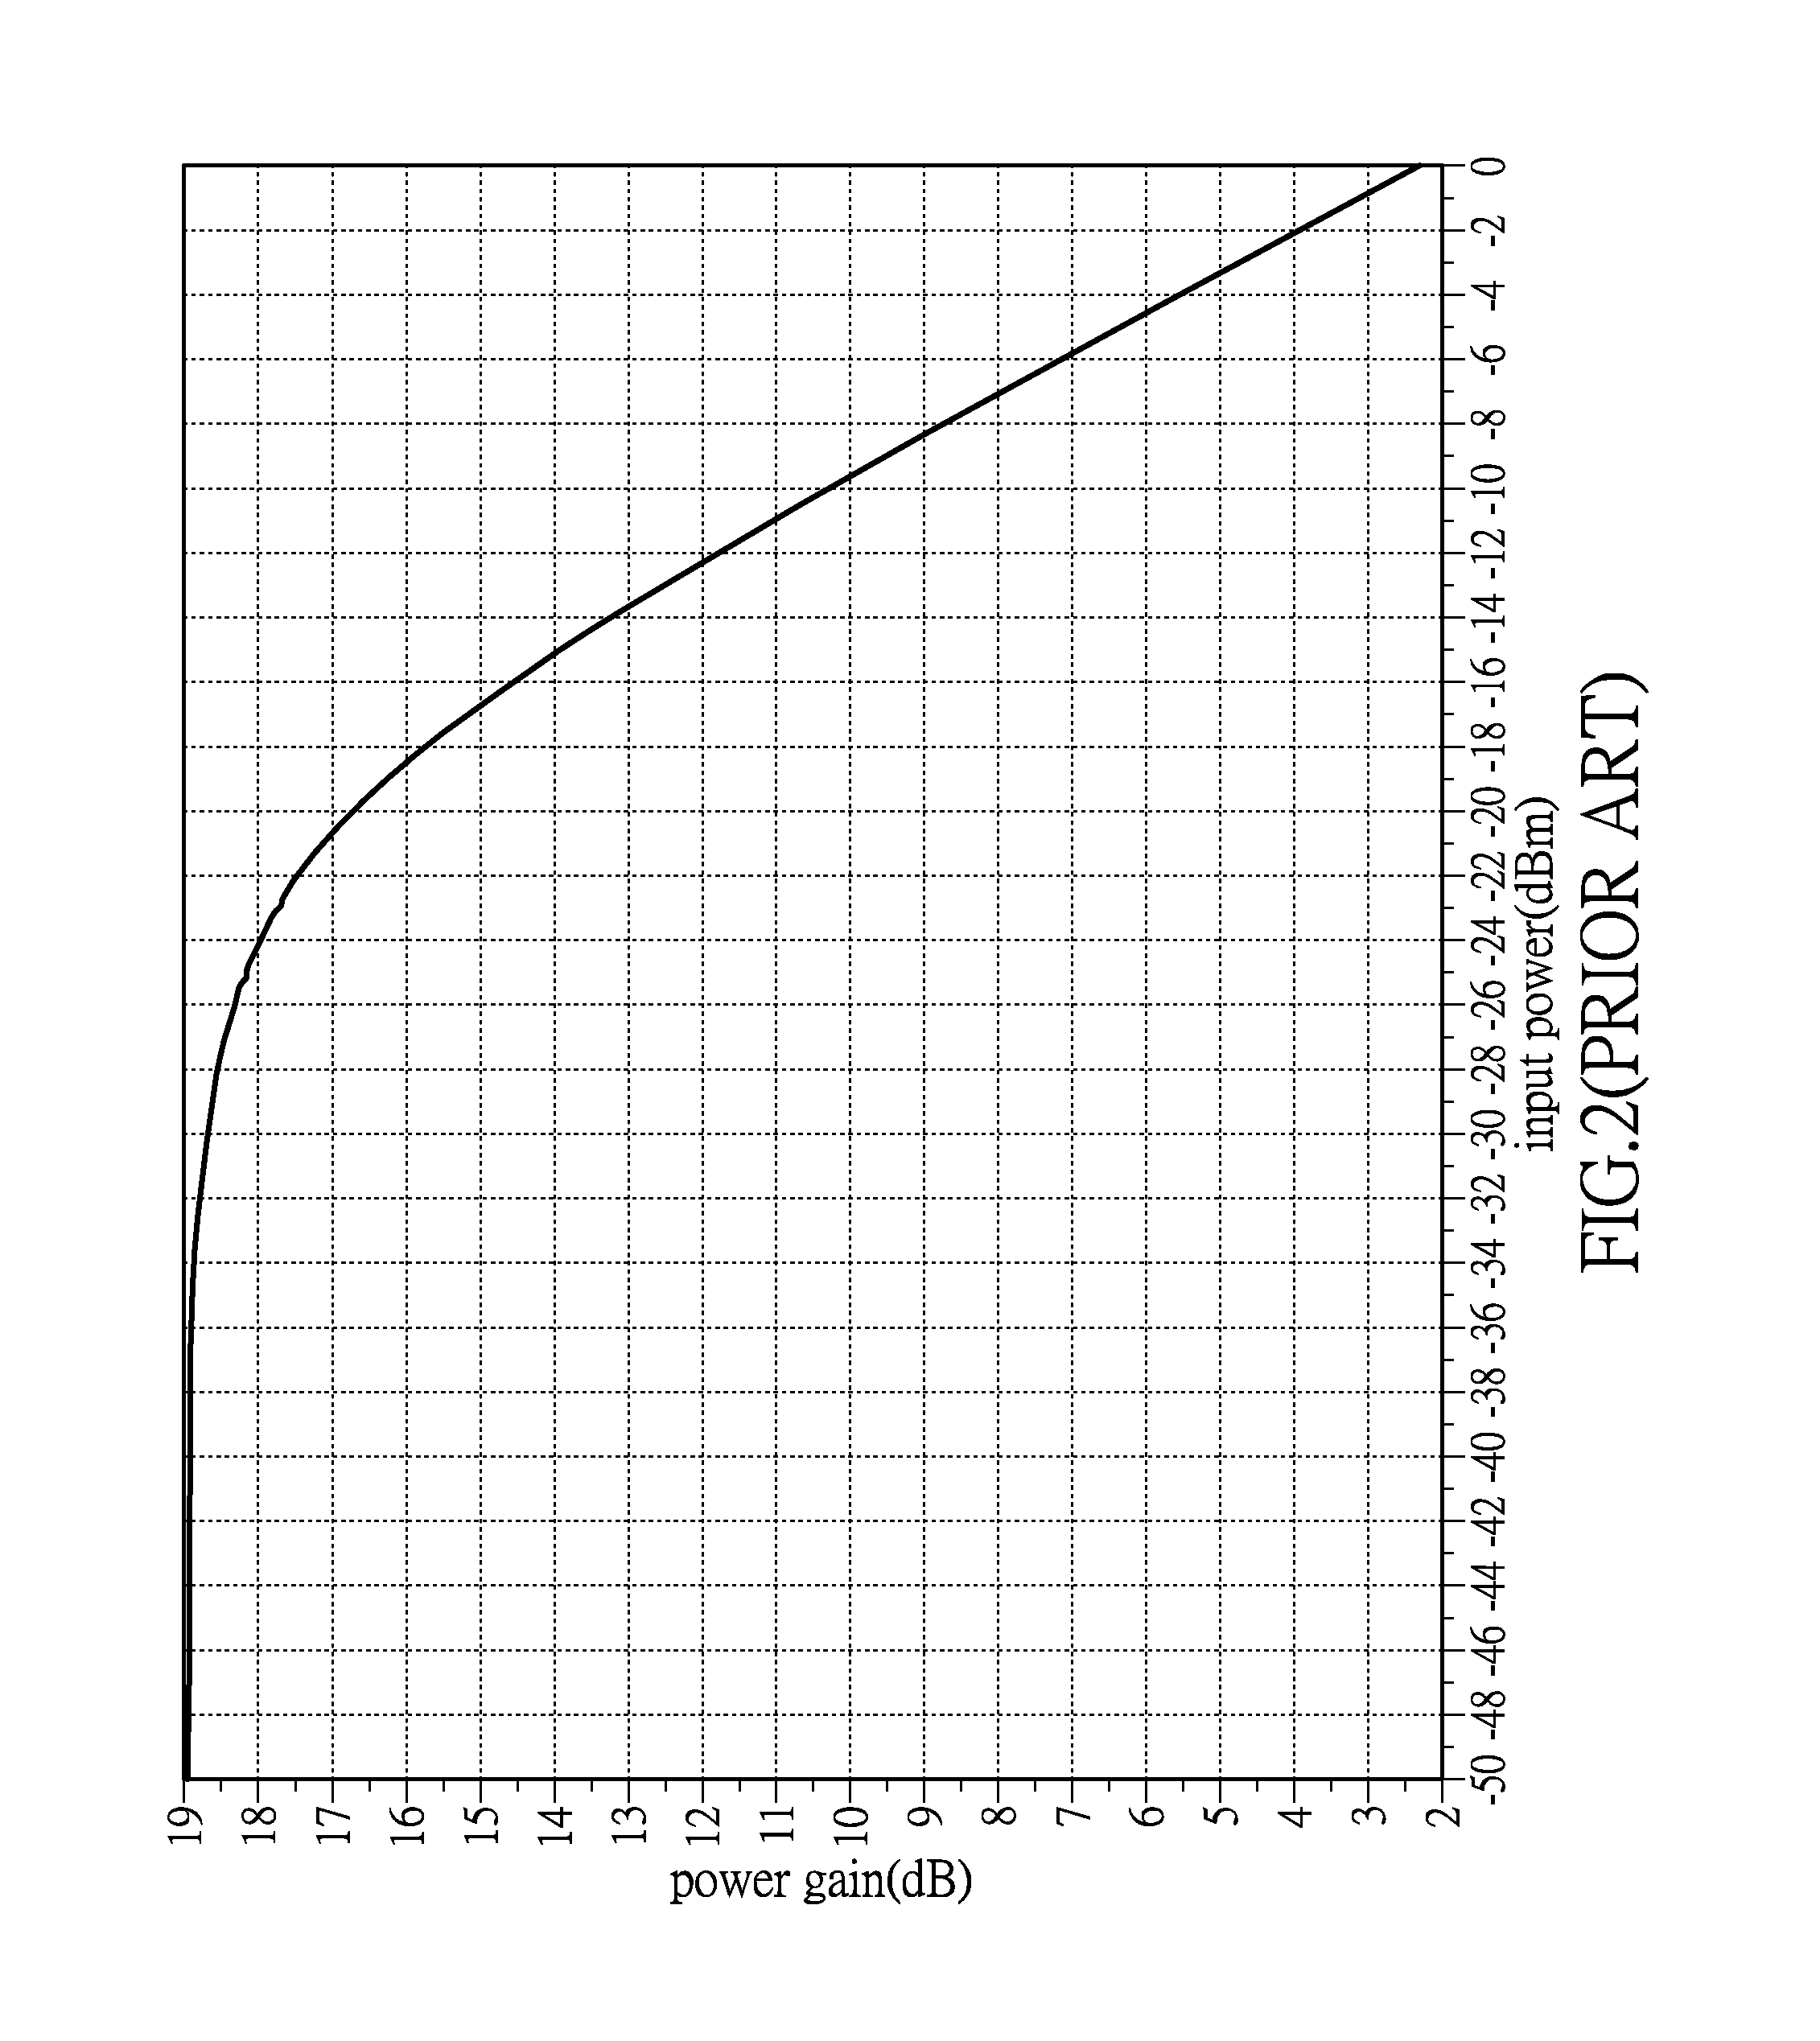 Low noise amplifier and receiver